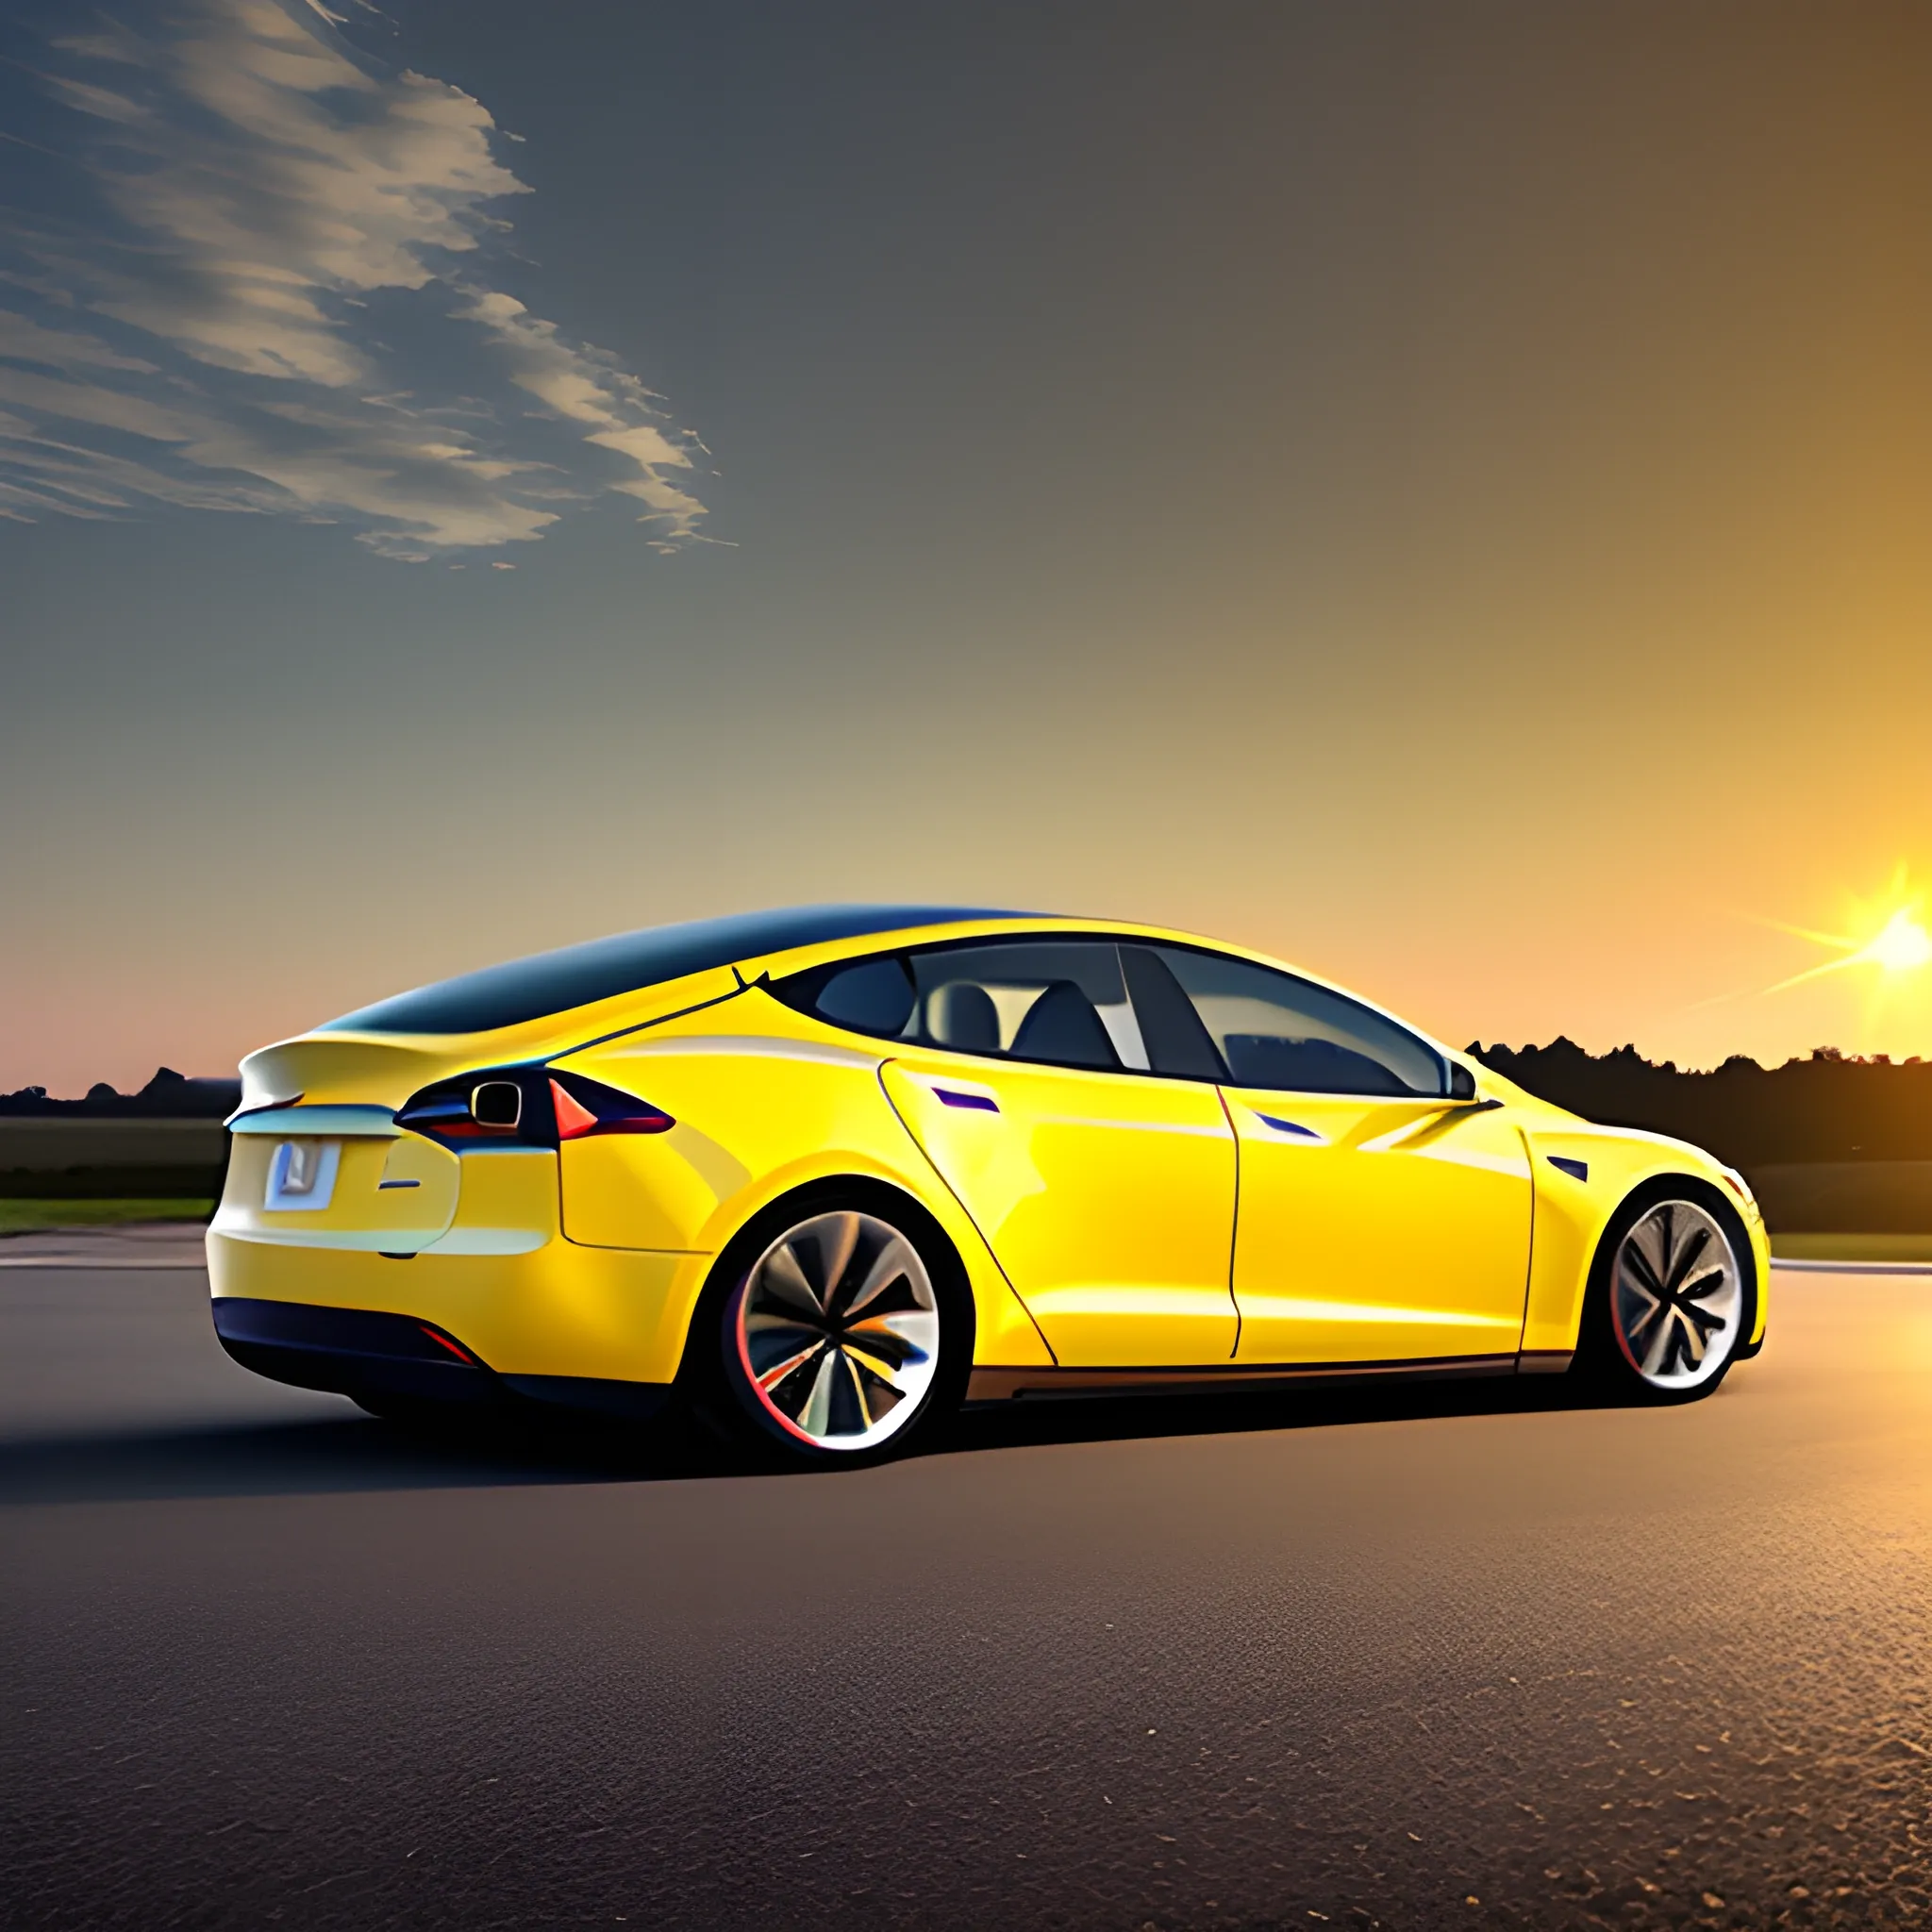 yellow tesla S on road side view, low angle, rear view, at sunset, 3D